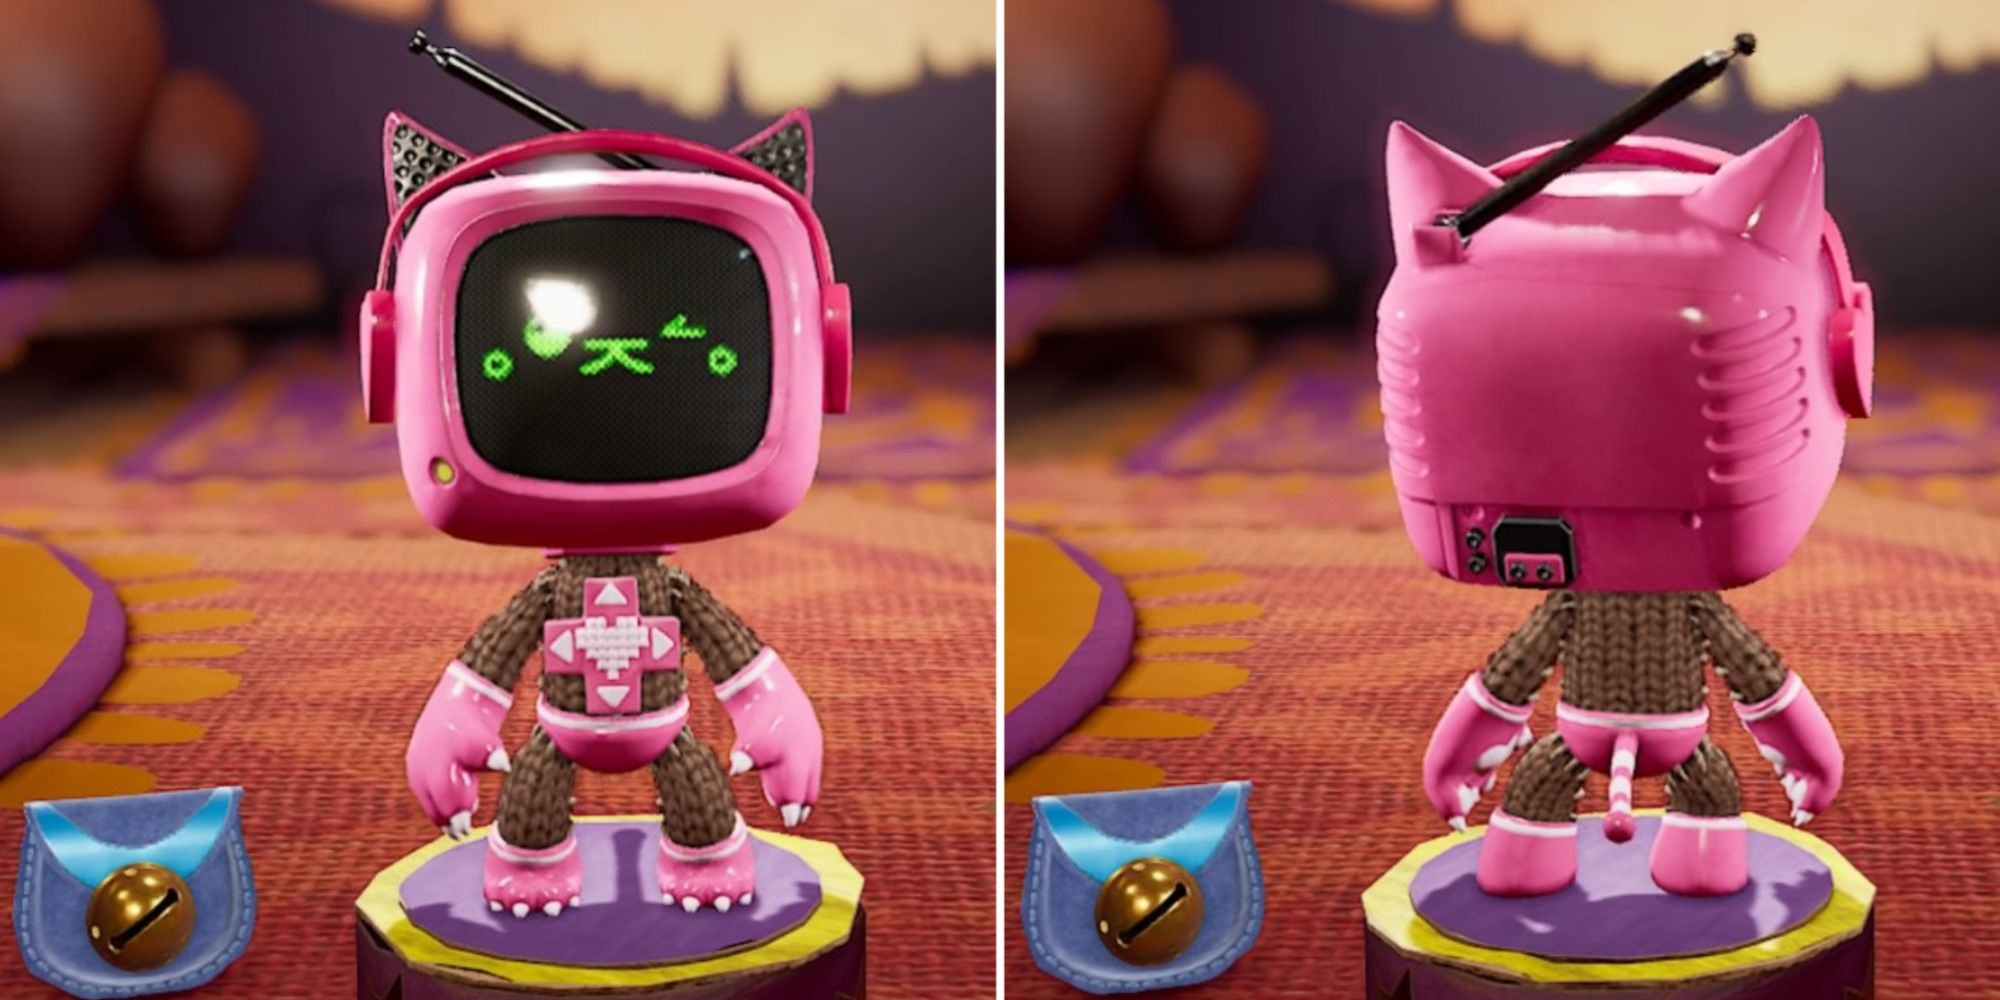 Two screenshots of the Console Kitty Costume from Sackboy: A Big Adventure.